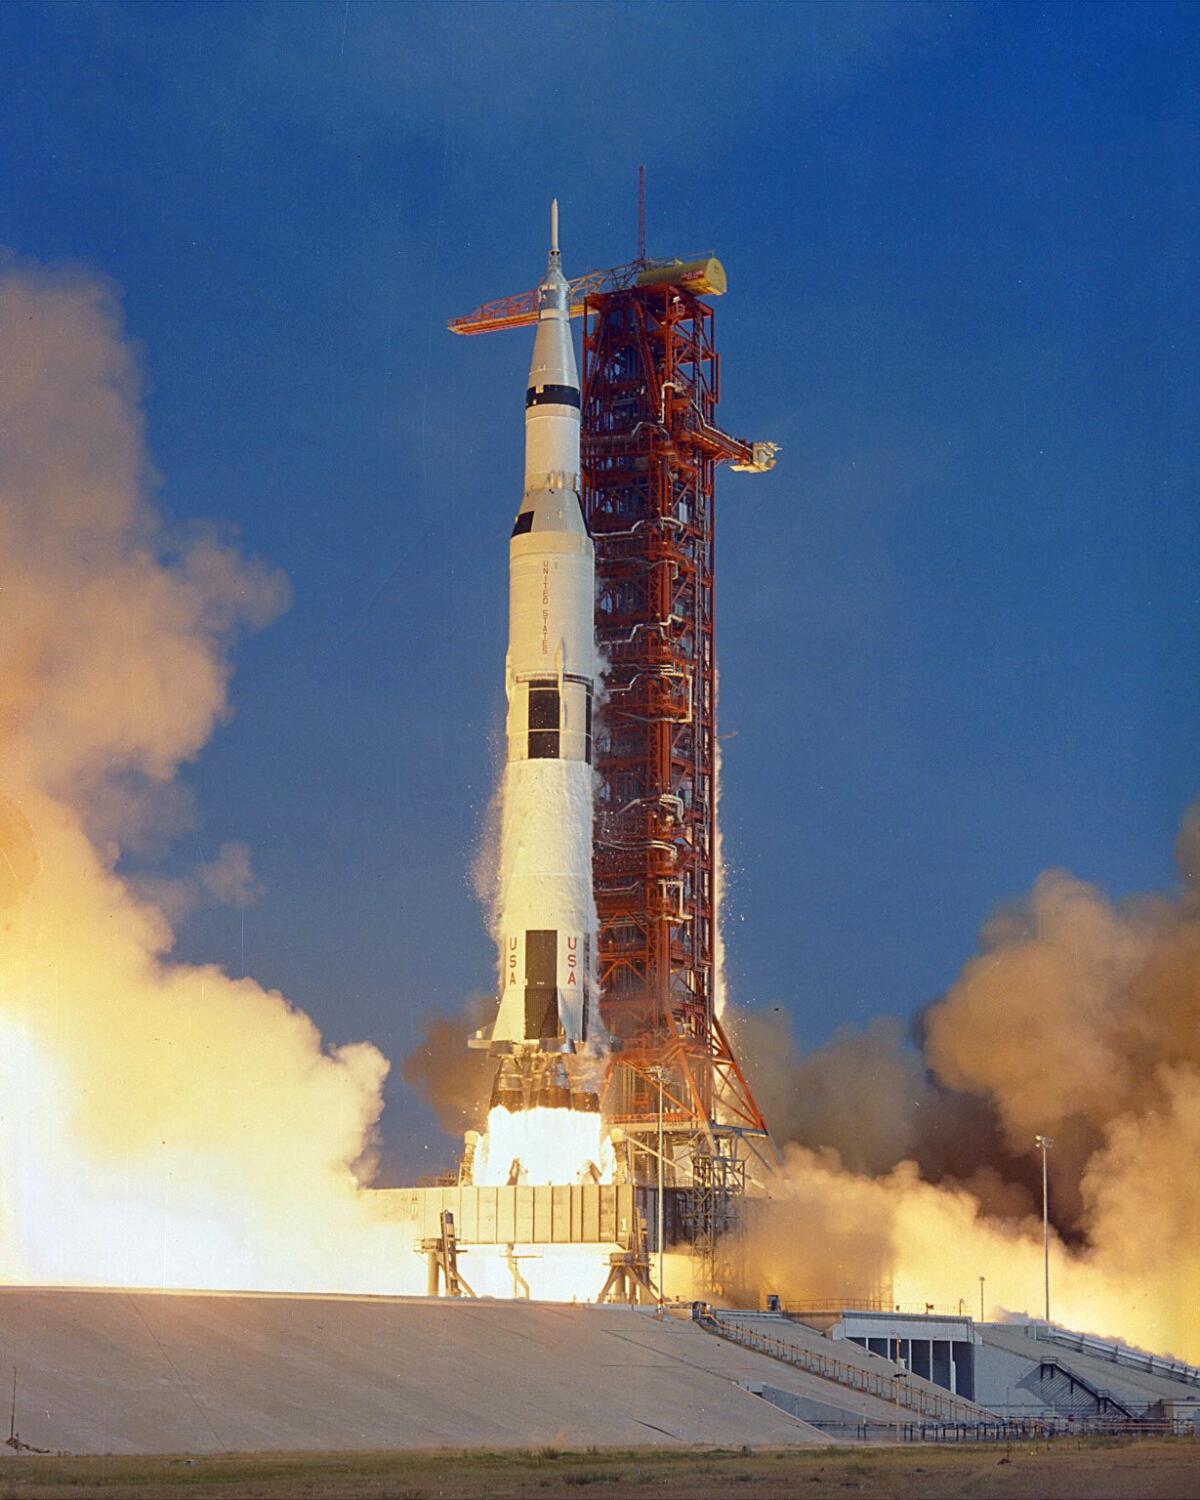 The Apollo 11 Saturn V space vehicle lifts off with astronauts Neil Armstrong, Michael Collins and Edwin "Buzz" Aldrin in 1969. (NASA)